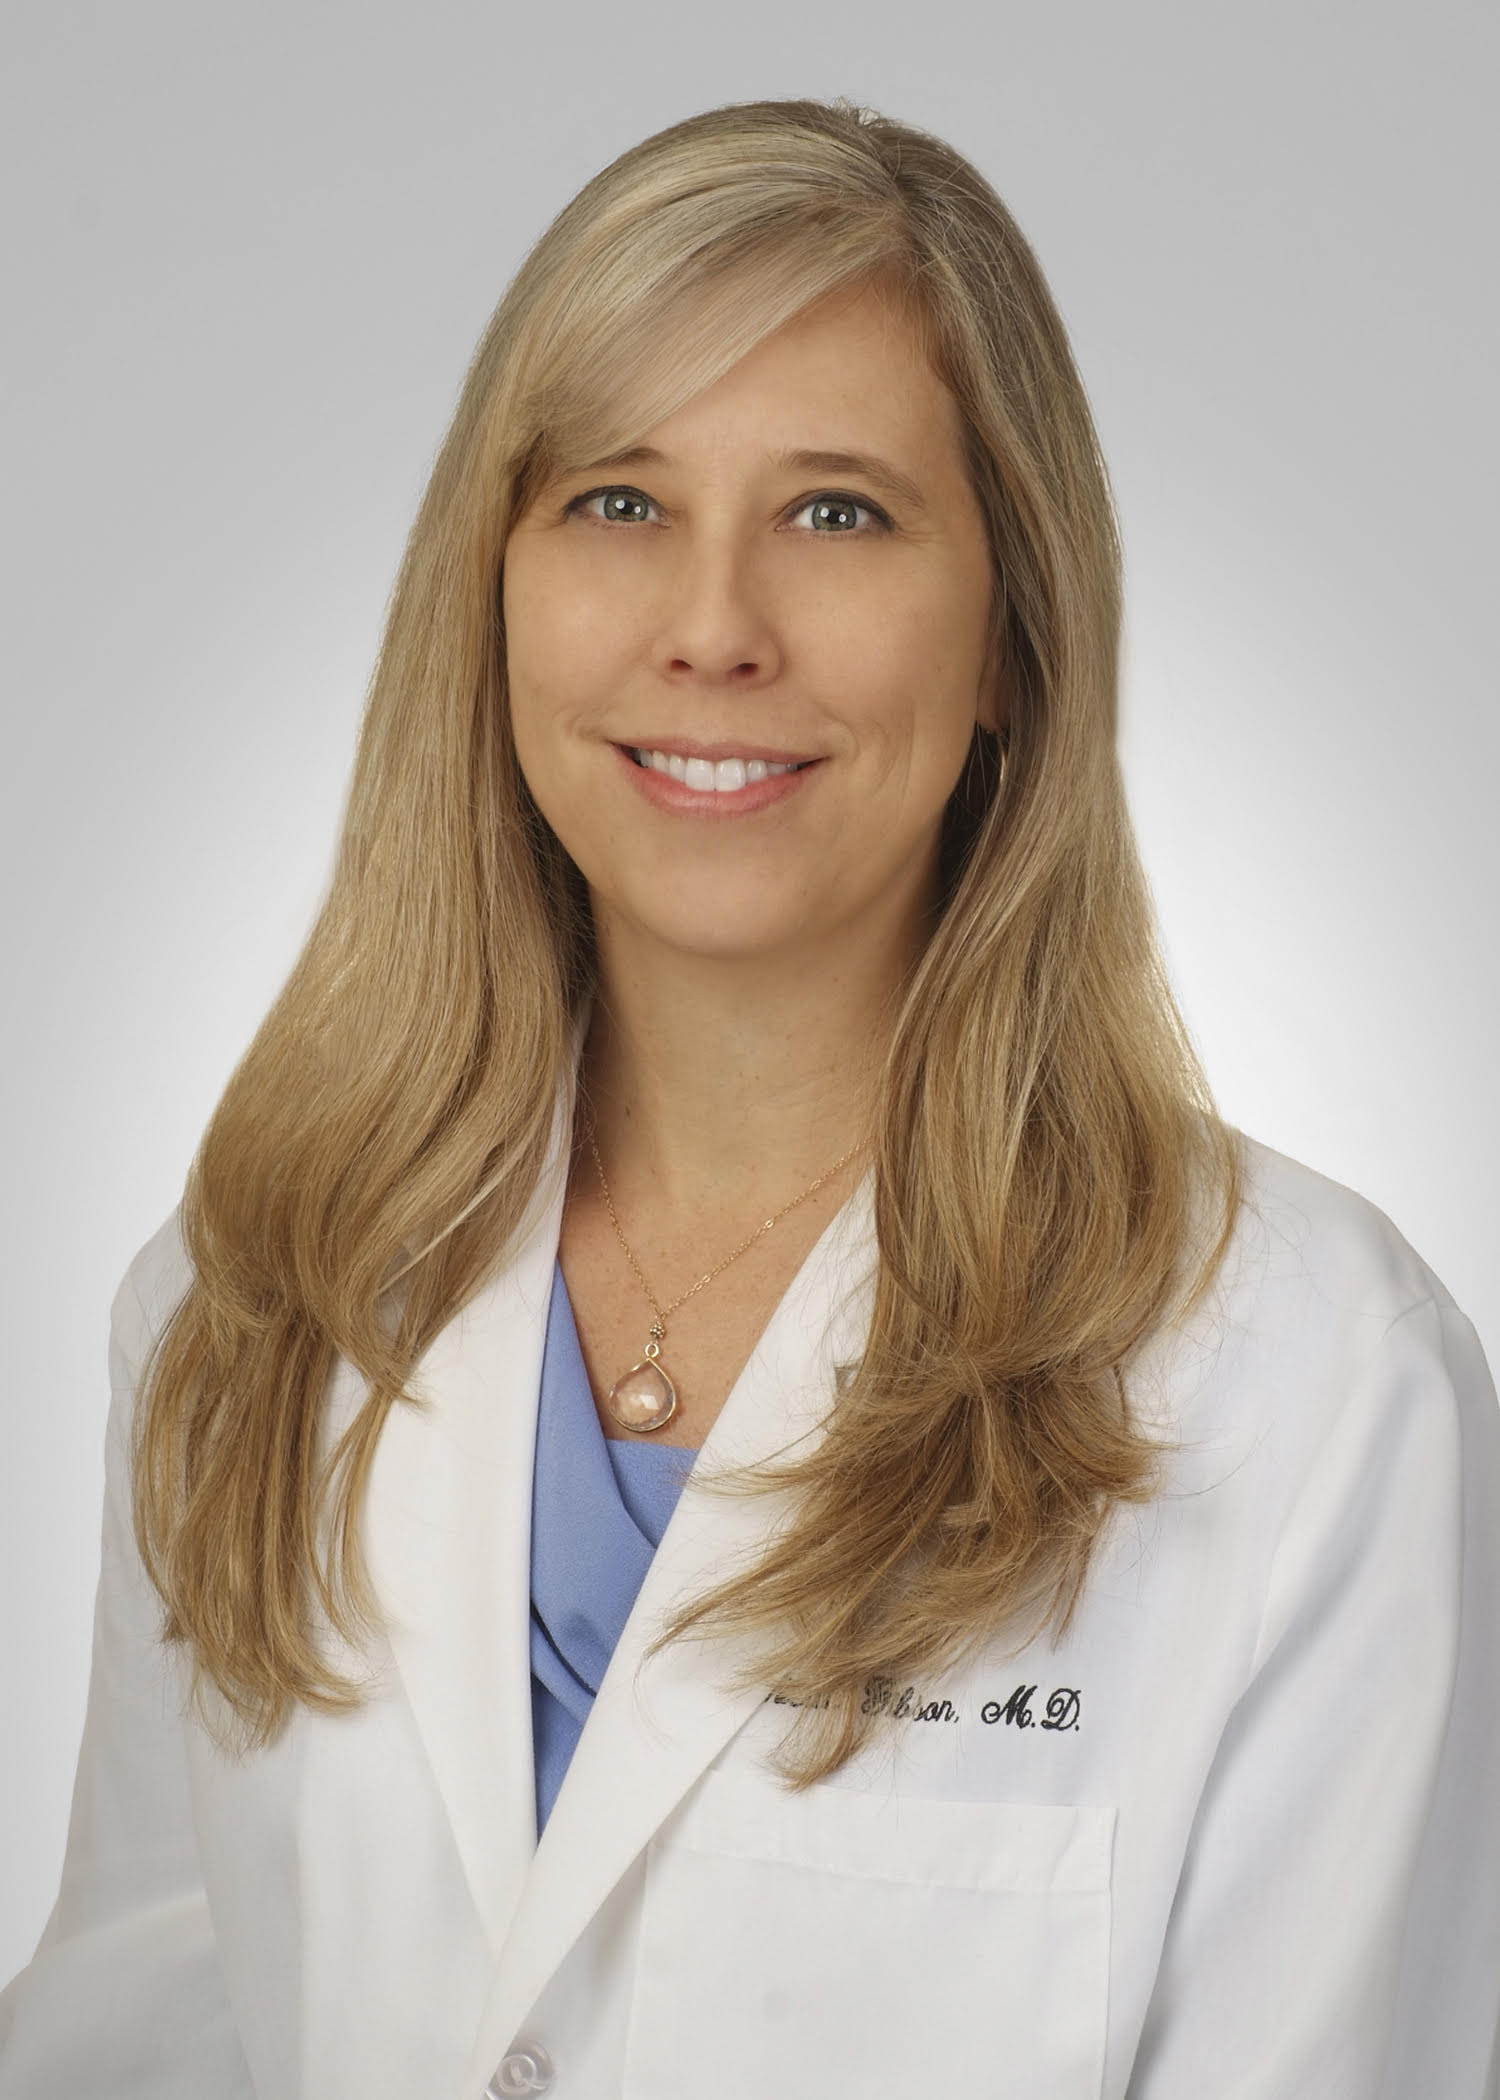 Danielle Gibson, MD, MBA